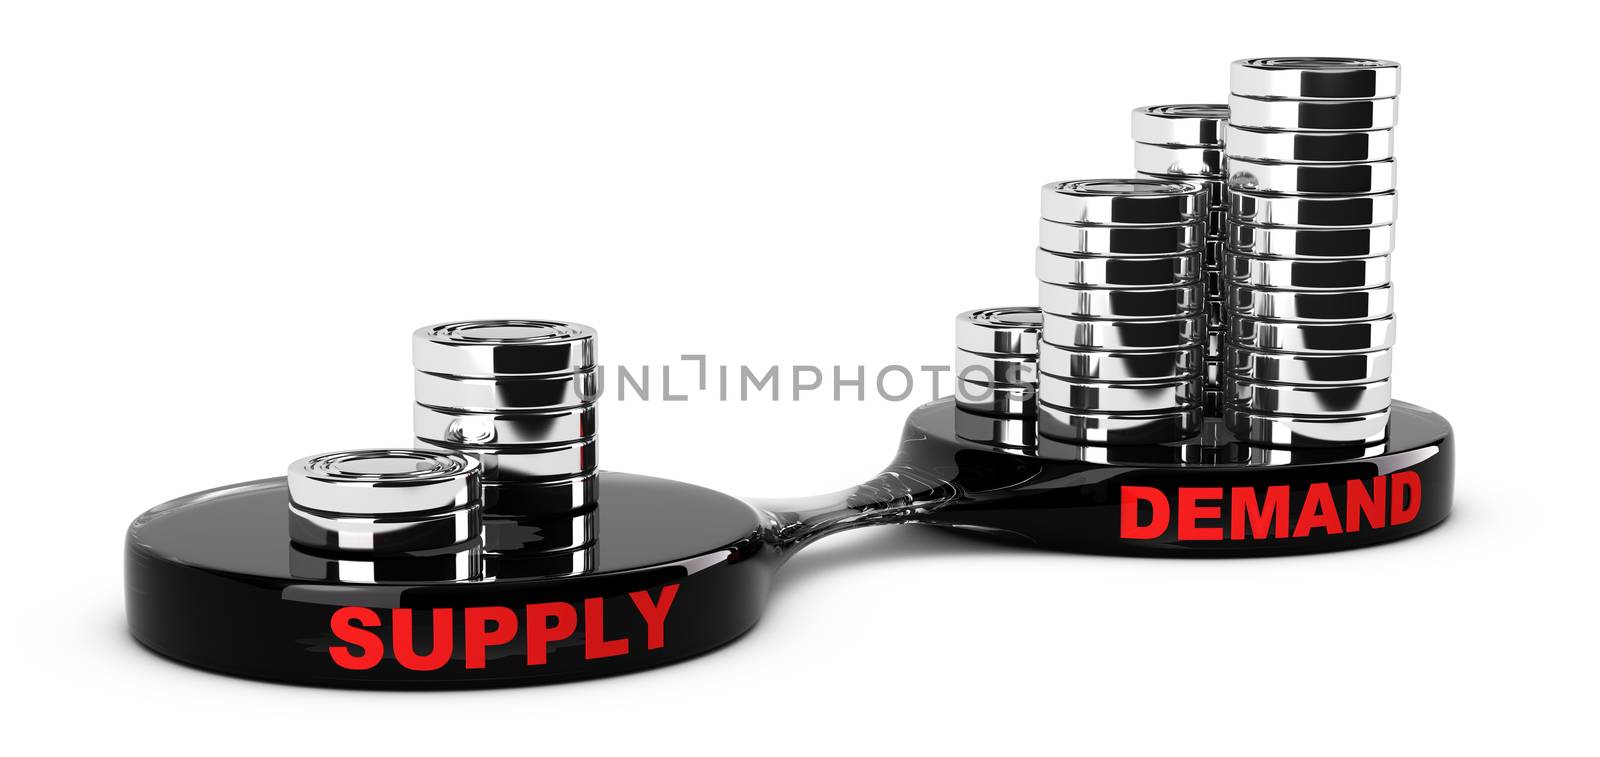 Supply and Demand by Olivier-Le-Moal